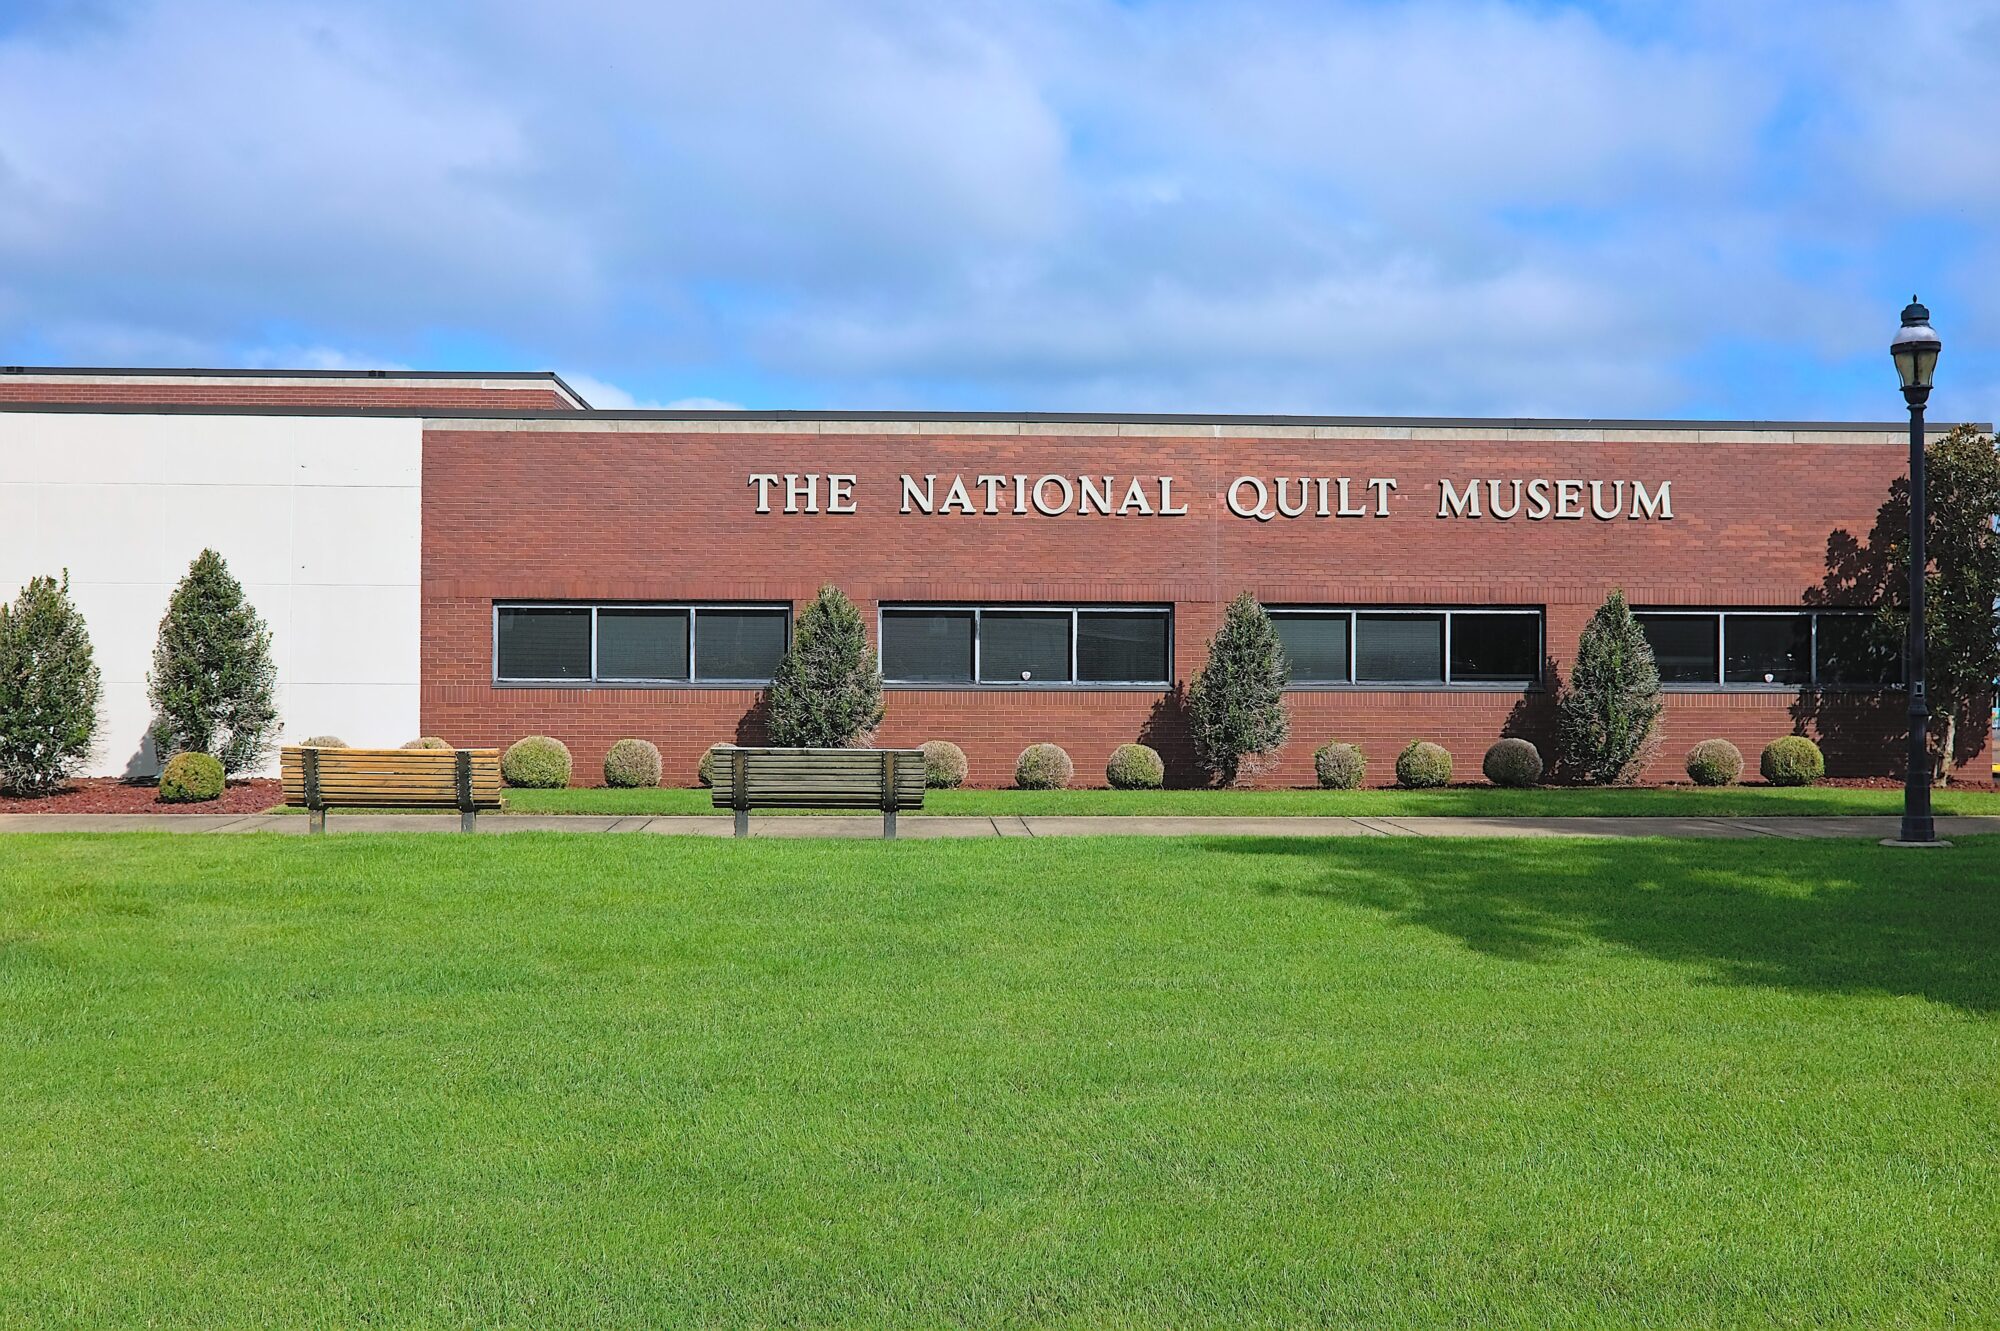 Exterior of The National Quilt Museum in Paducah